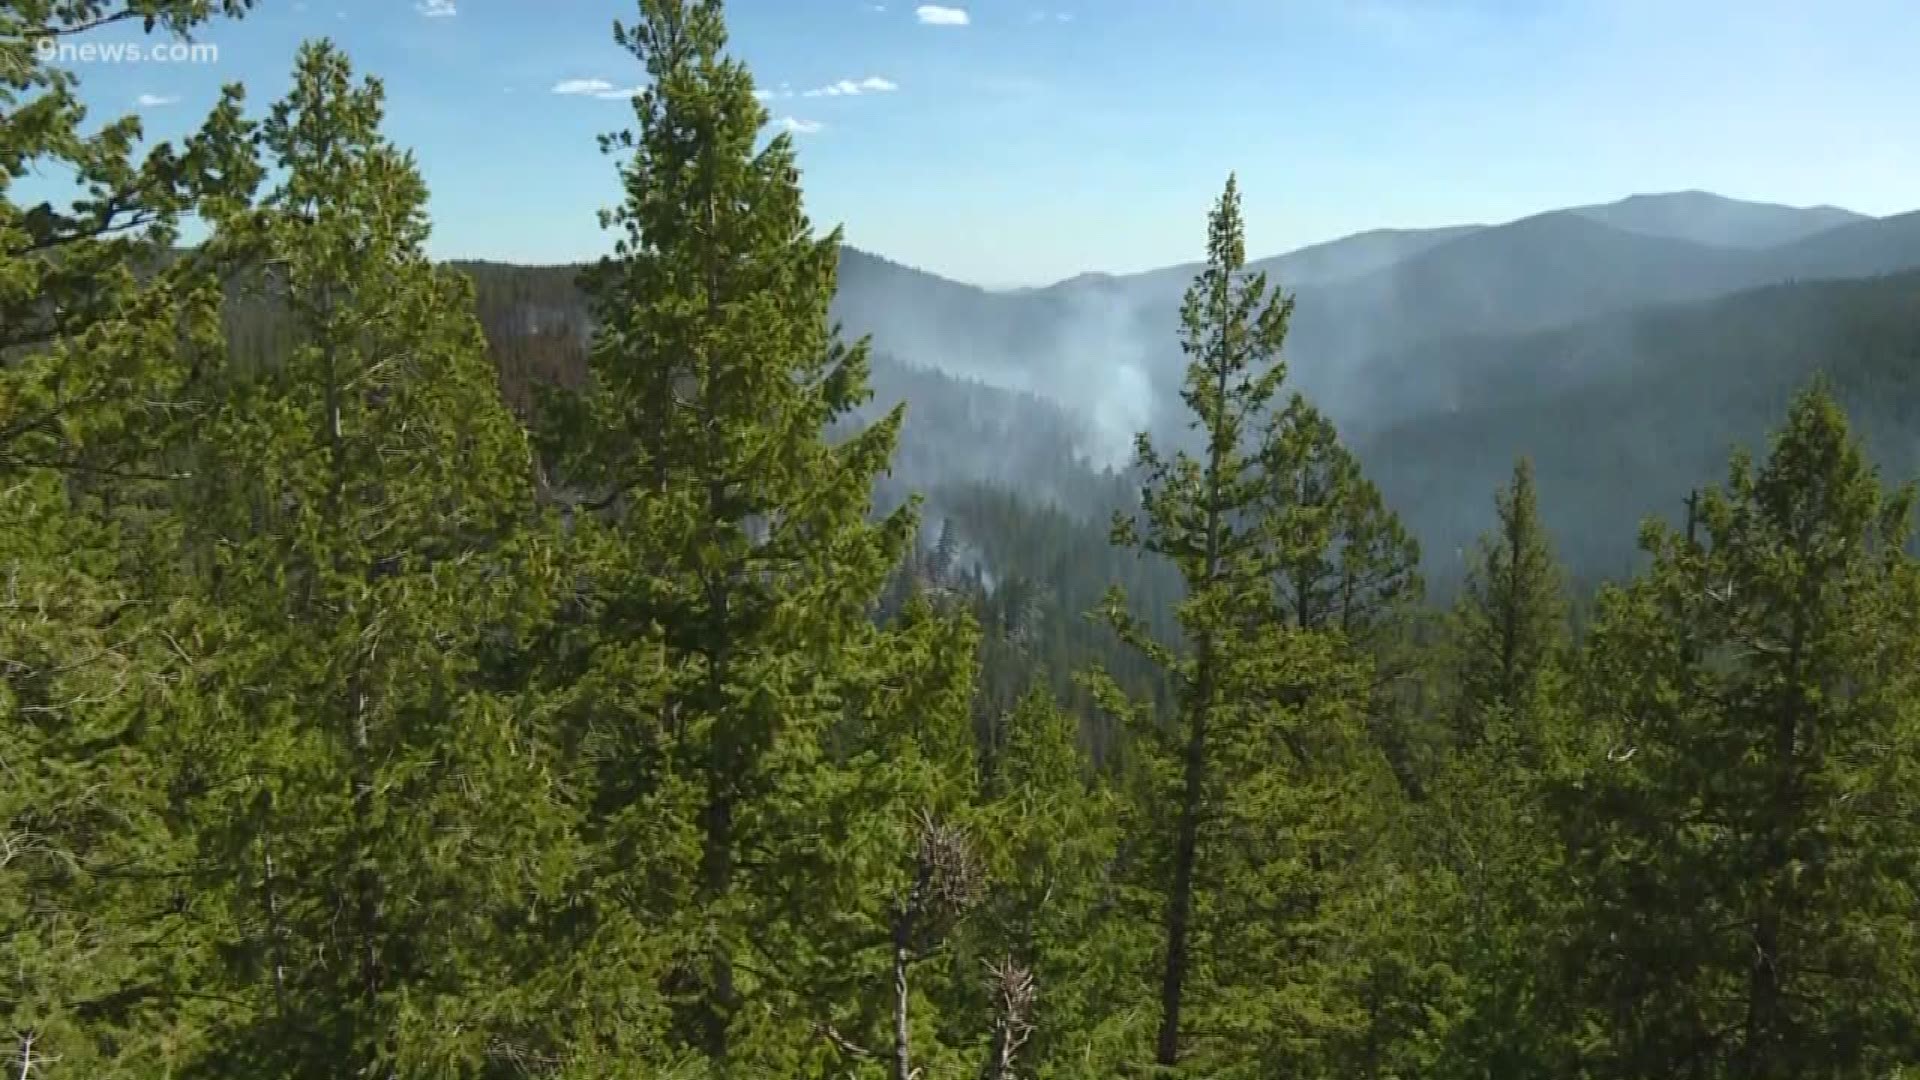 A wildfire burning near Bellevue in northern Colorado has scorched 85 acres and is 25% contained, according to the U.S. Forest Service.